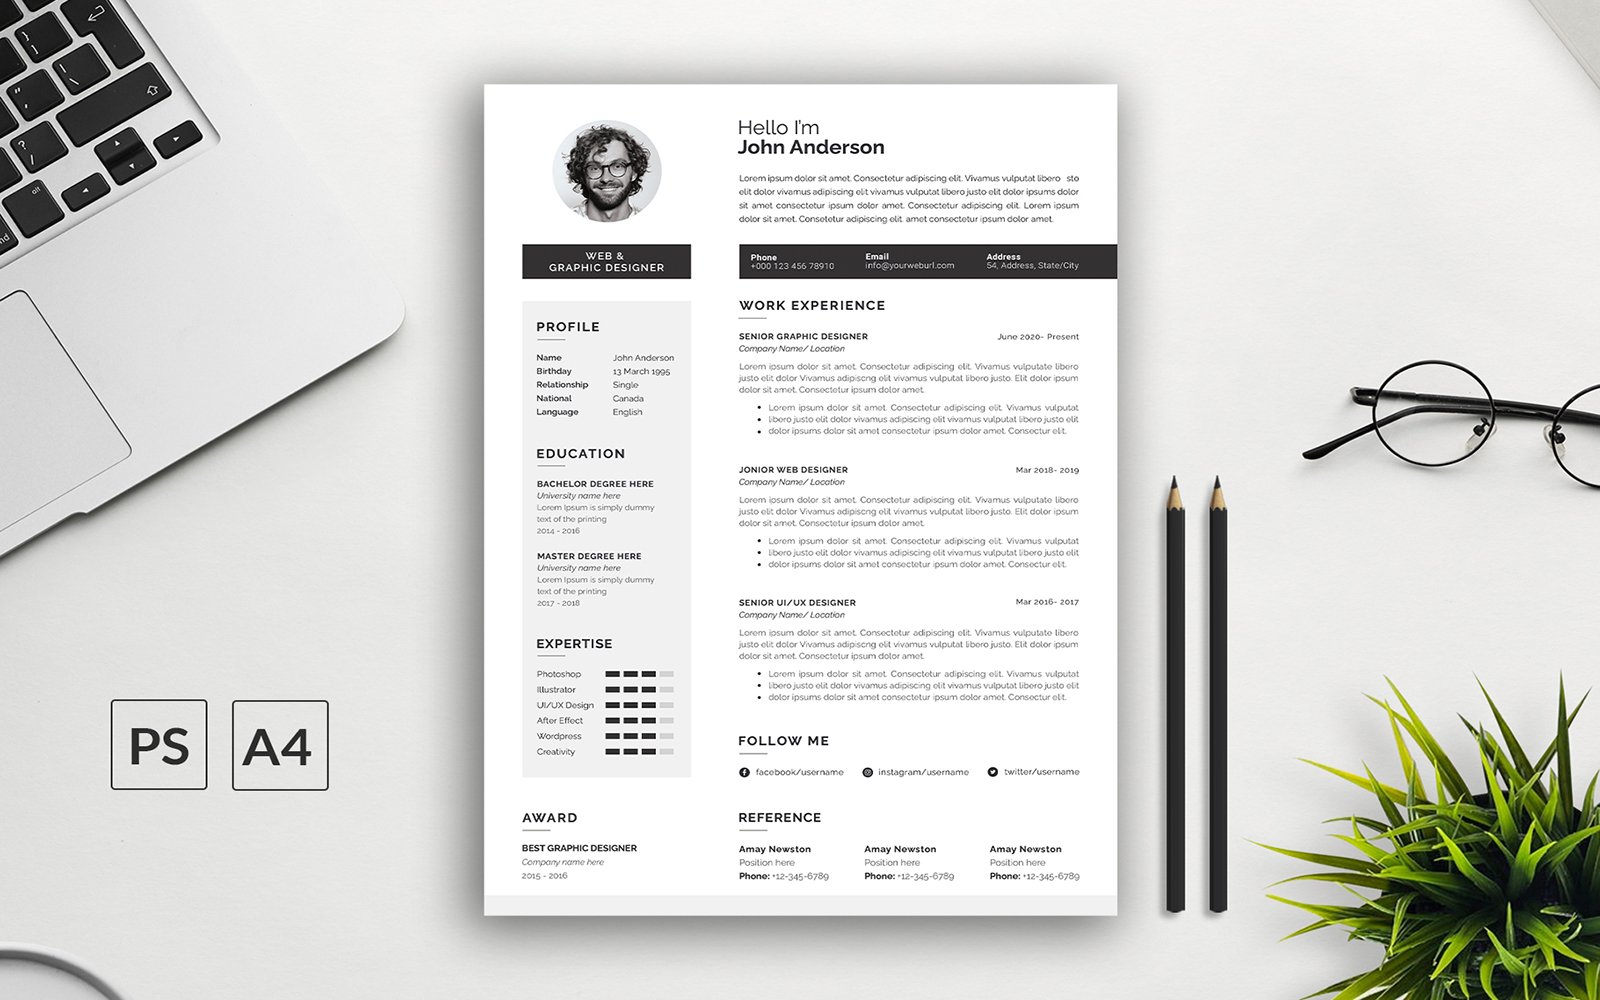 Template #338881 Job Cover Webdesign Template - Logo template Preview